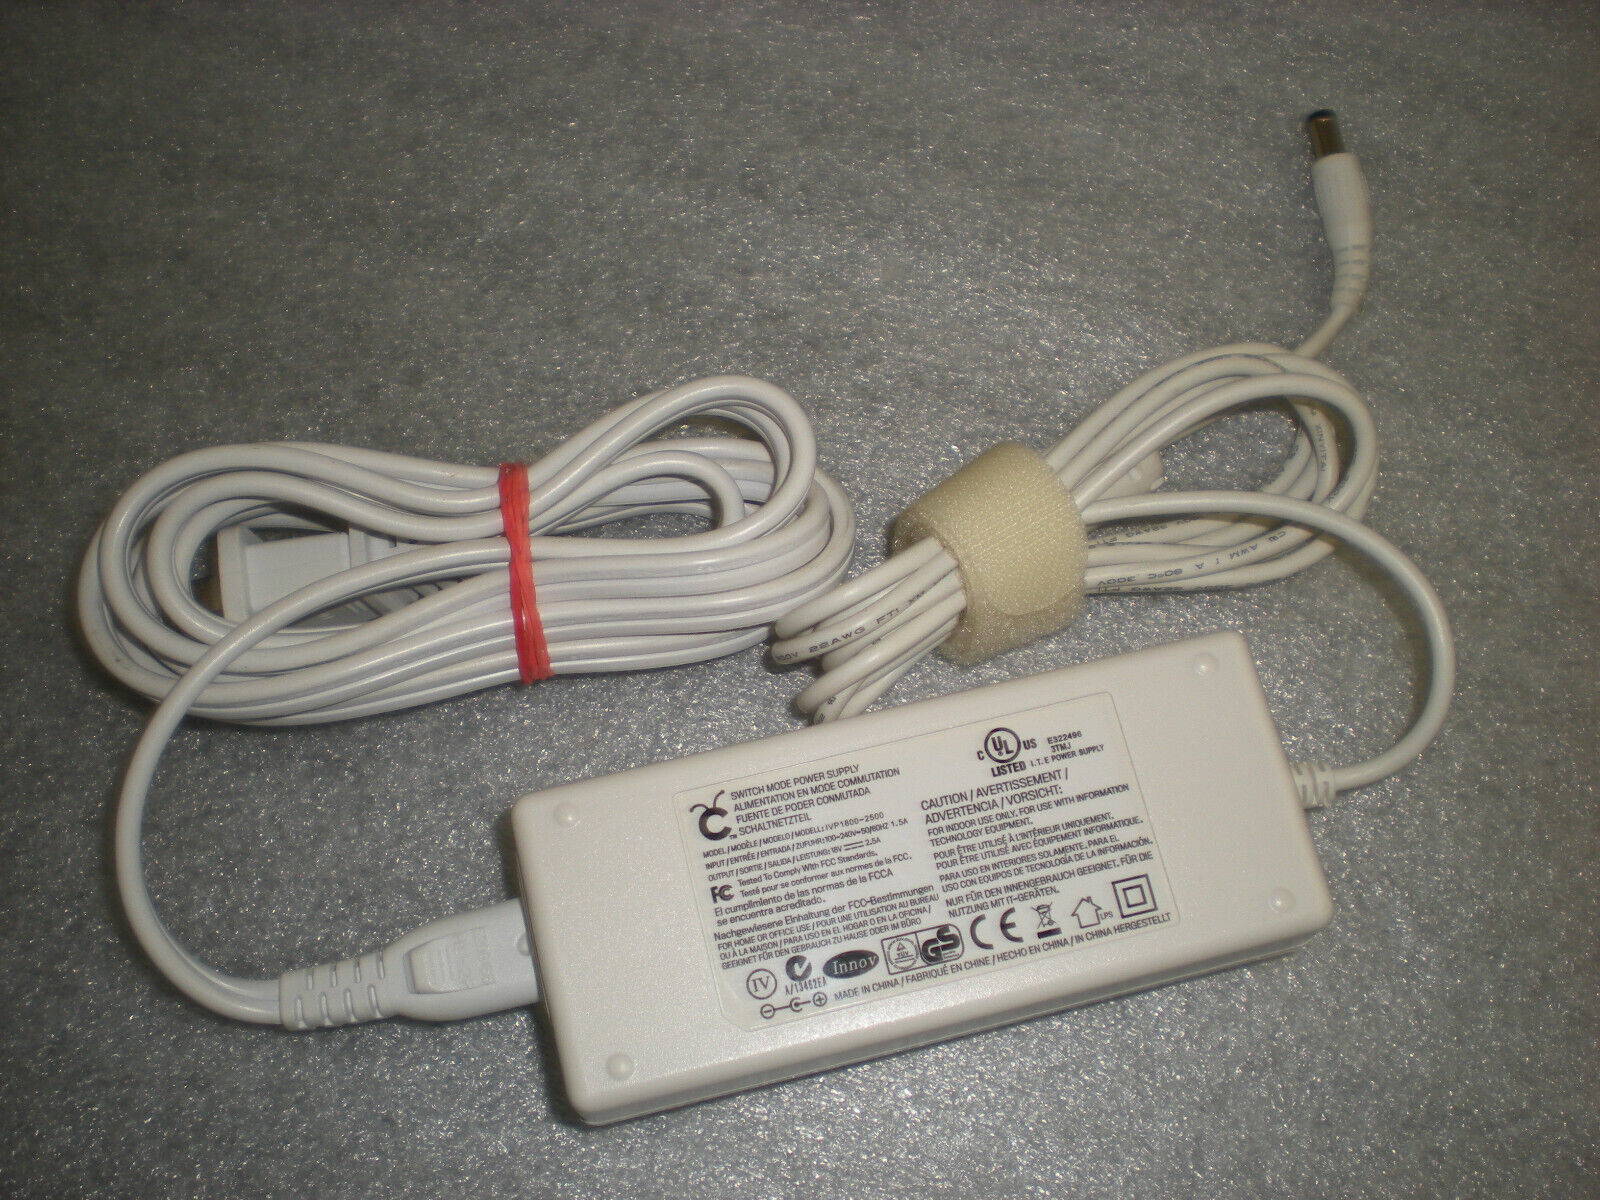 *Brand NEW*18V 2.5A Cord Model IVP1800-2500 Genuine Cricut Switch Mode Power Supply Adapter